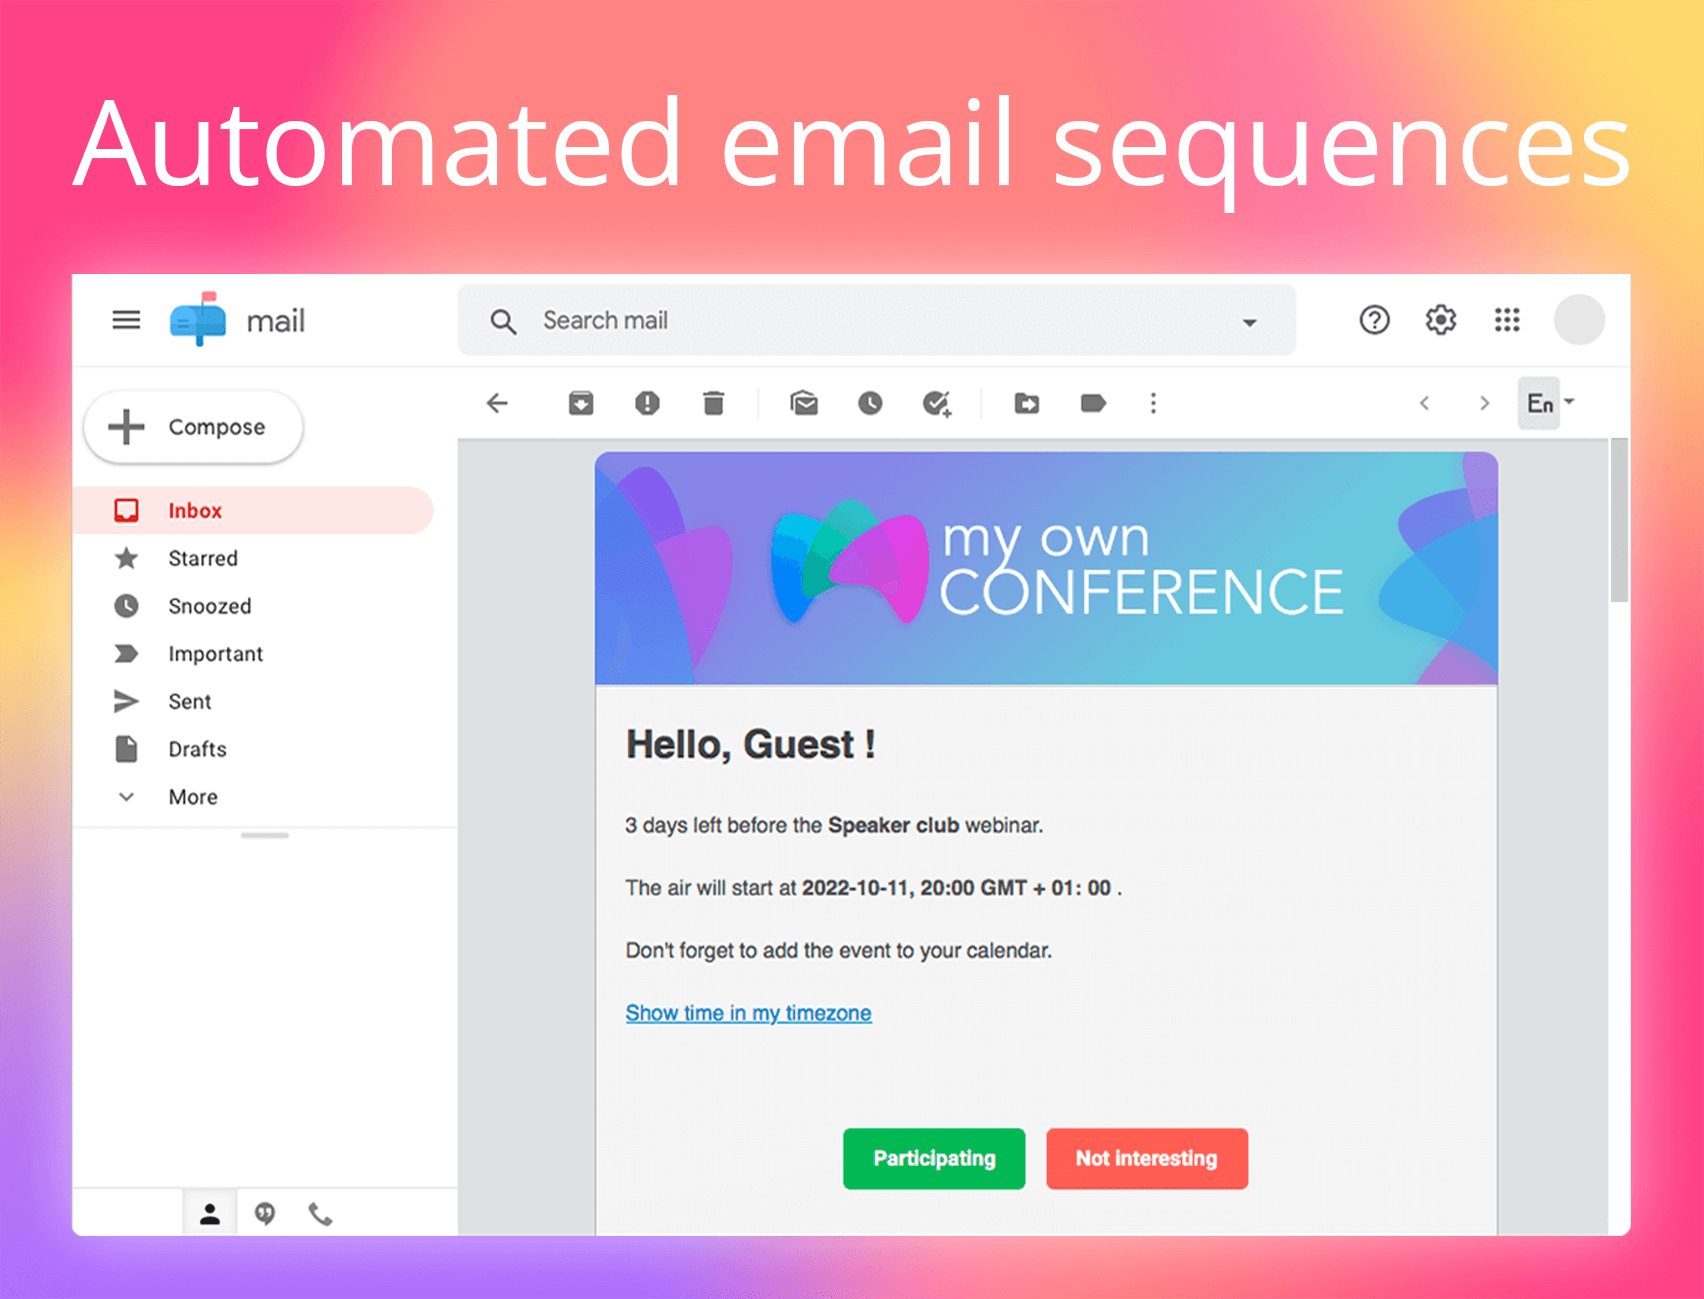 Automated email sequences! Want to maximize attendance? Setup automated email invites and reminders in seconds. People are lazy, make joining hassle-free.